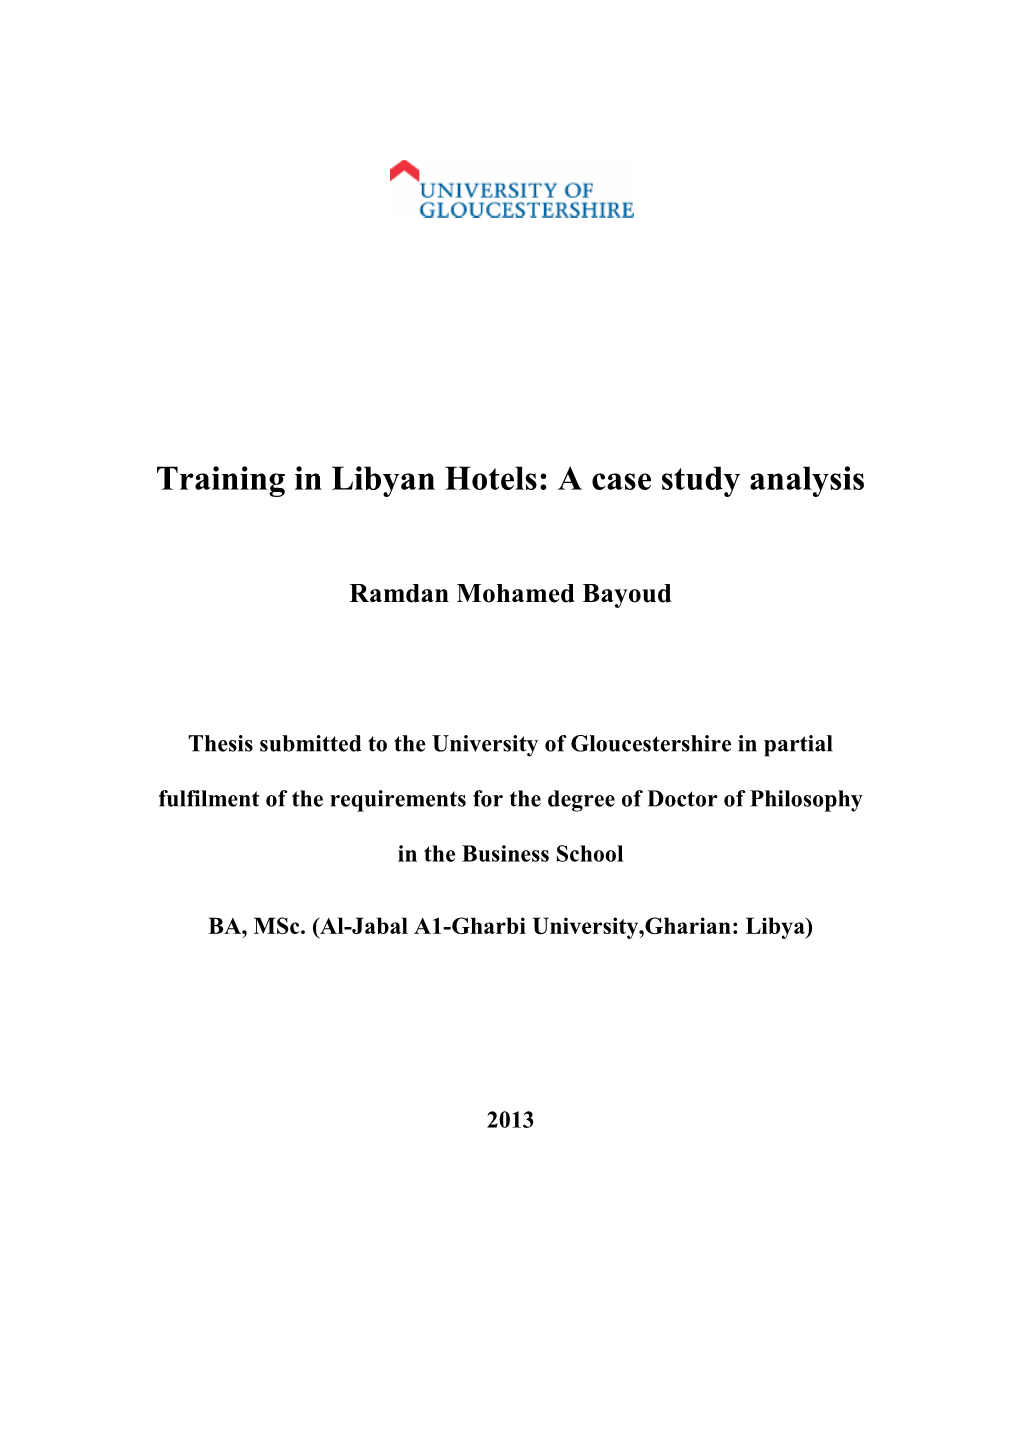 Training in Libyan Hotels: a Case Study Analysis